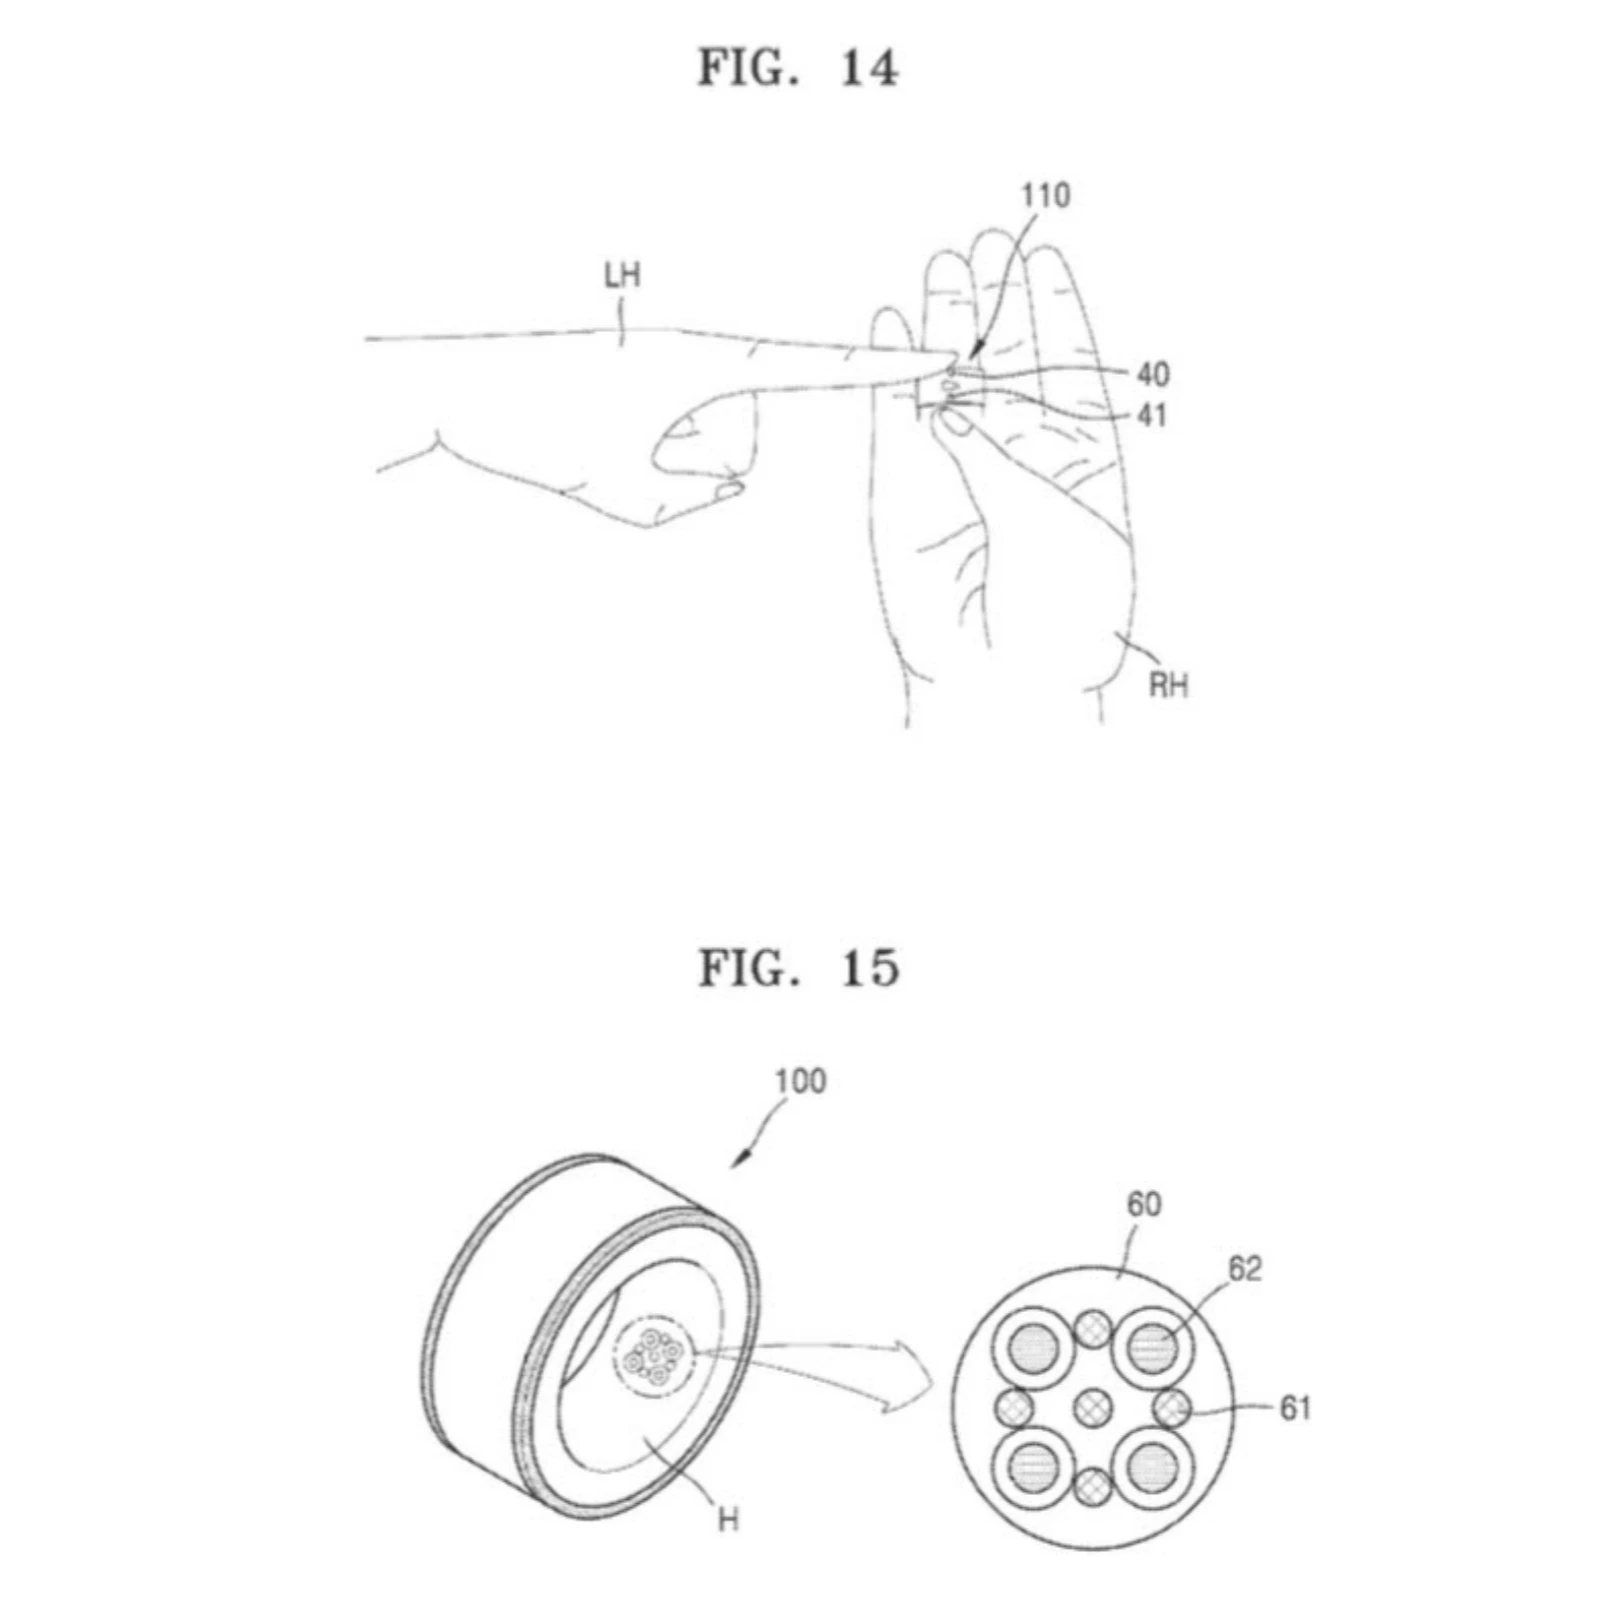 Samsung Galaxy Ring patent images